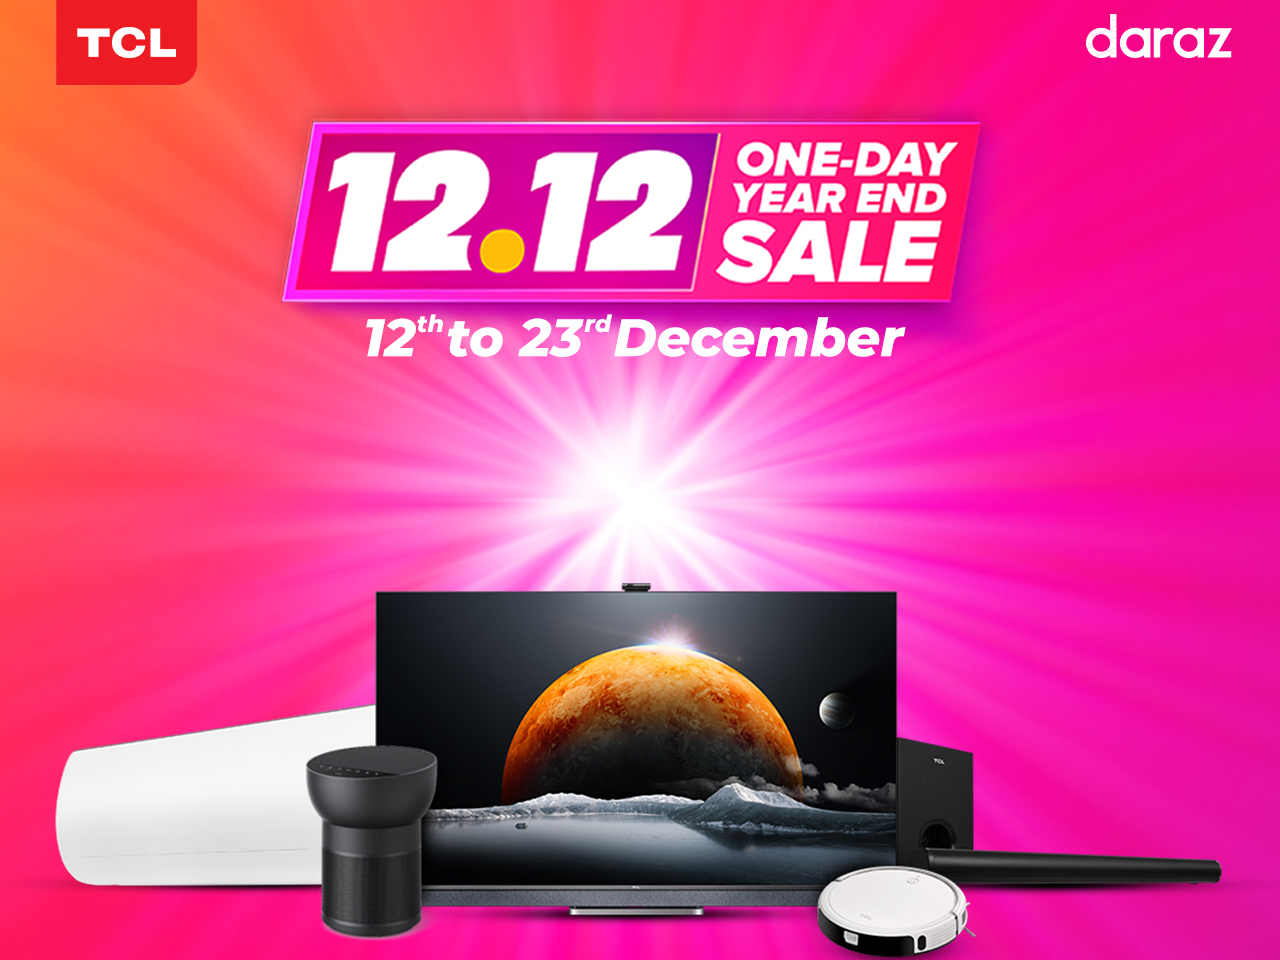 TCL Pakistan and Daraz gear up for the Year's End Sale 12.12